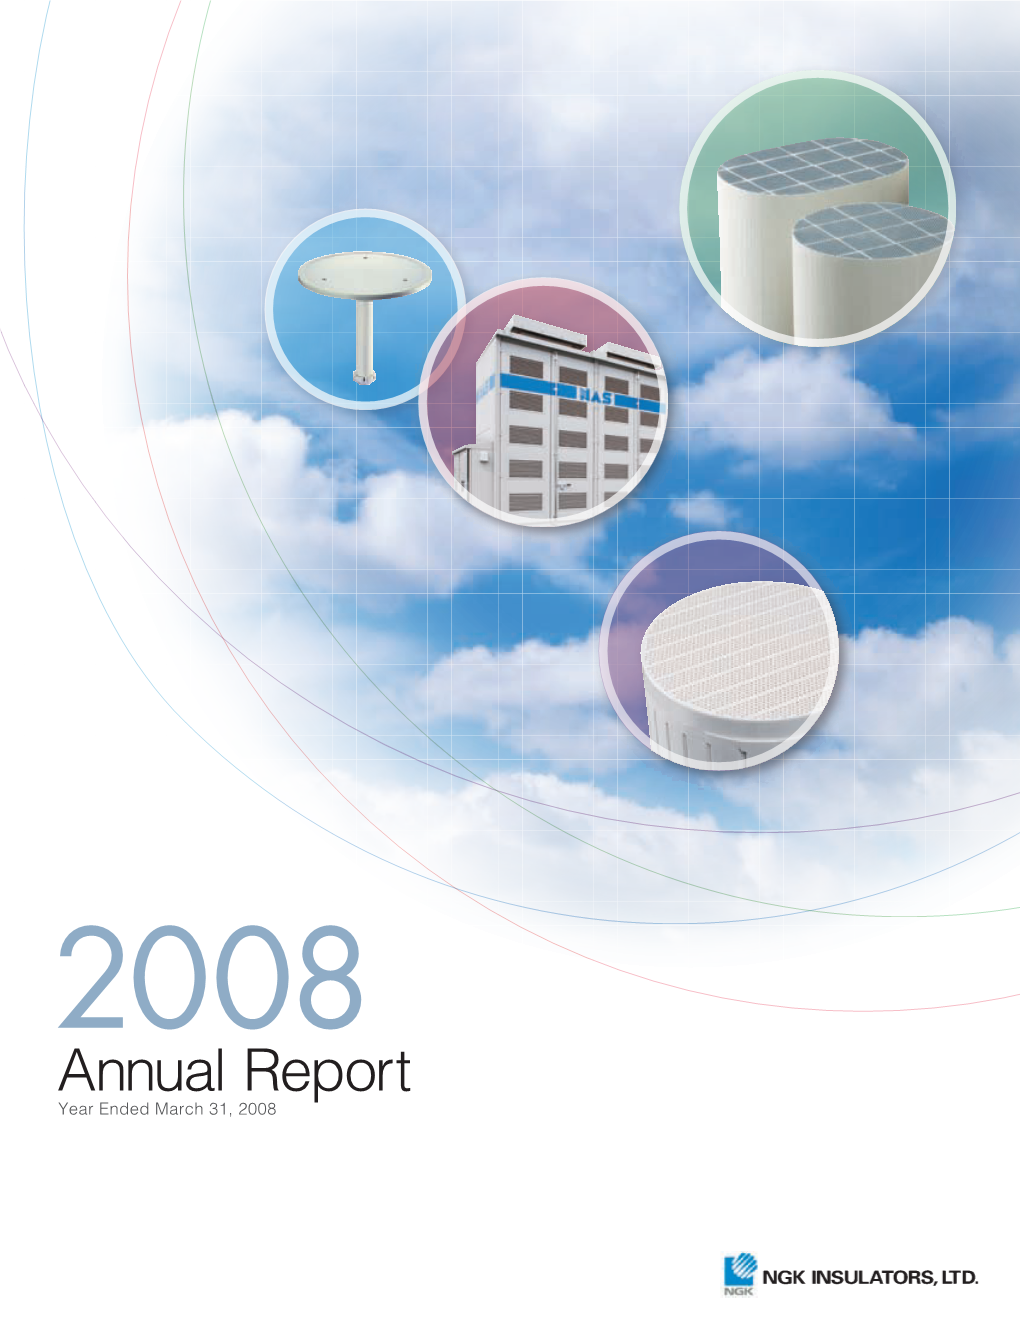 Audited Annual Financial Report 2008(1955KB)